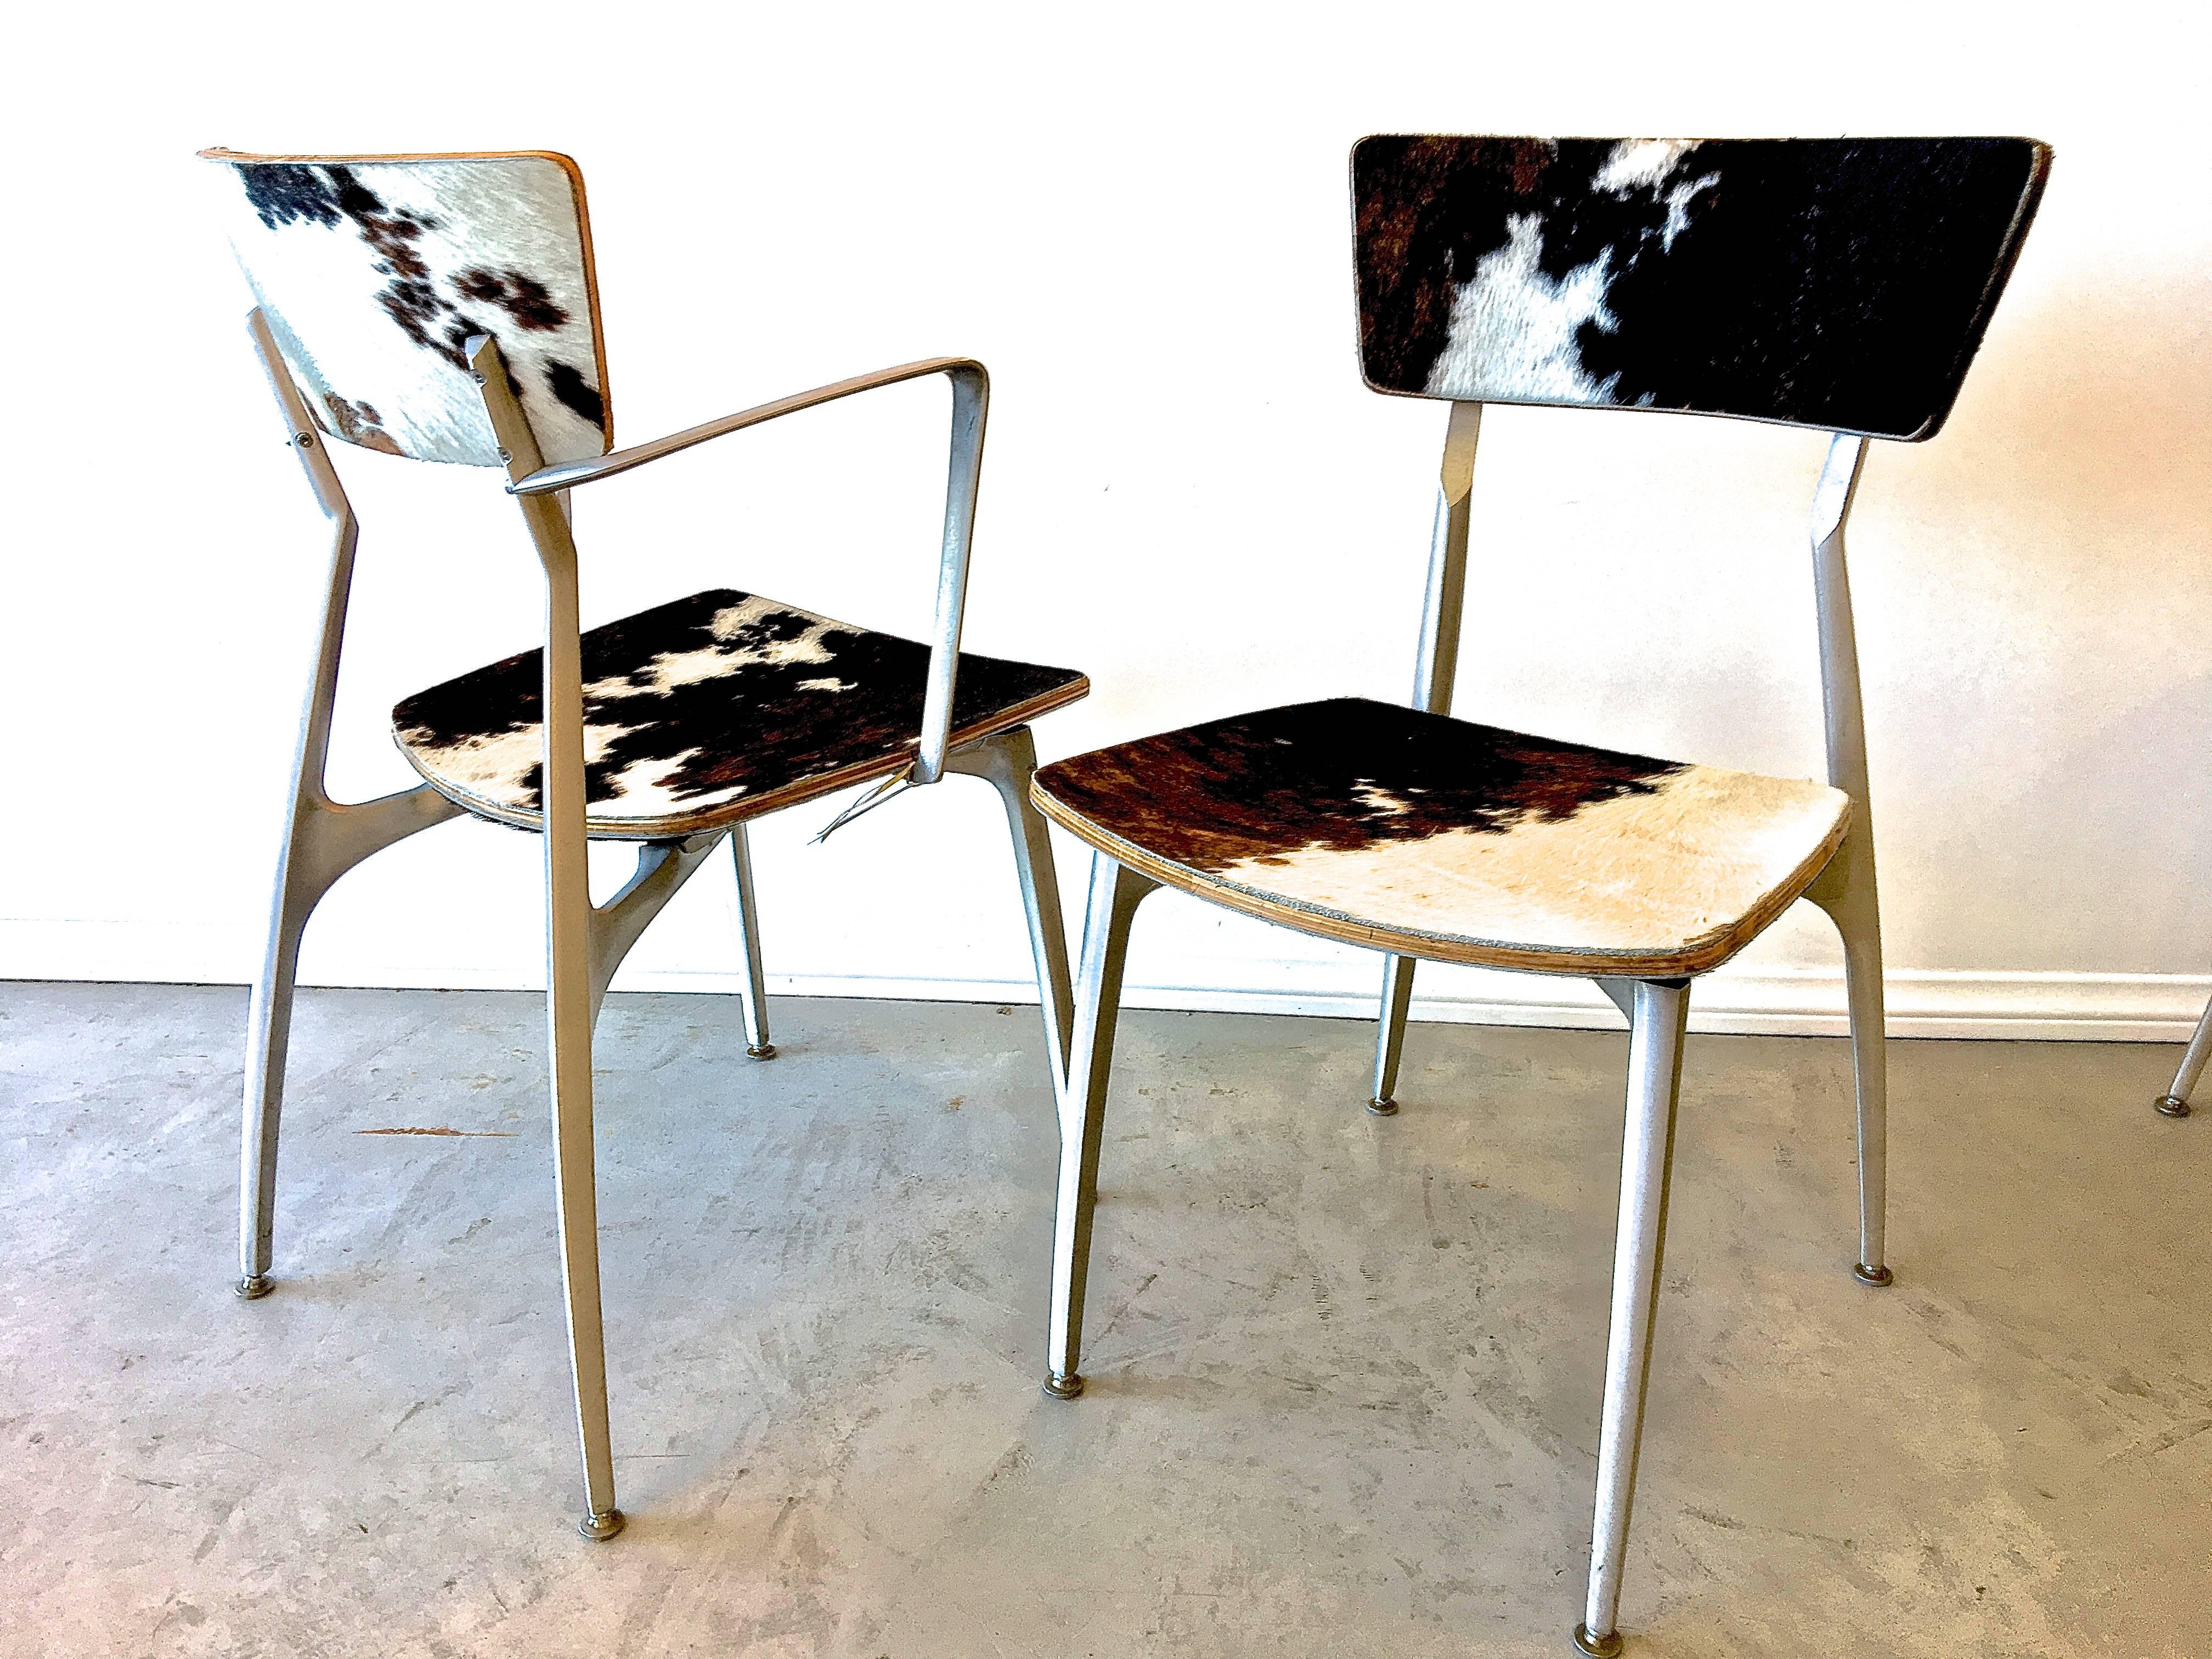 Mid-Century Modern set of four dining height chairs - two arm and two side - sculpturally formed from sand-cast aluminum and covered in handsome cowhide. The angles and minimal lines of each chair provide ergonomical comfort as well as a striking